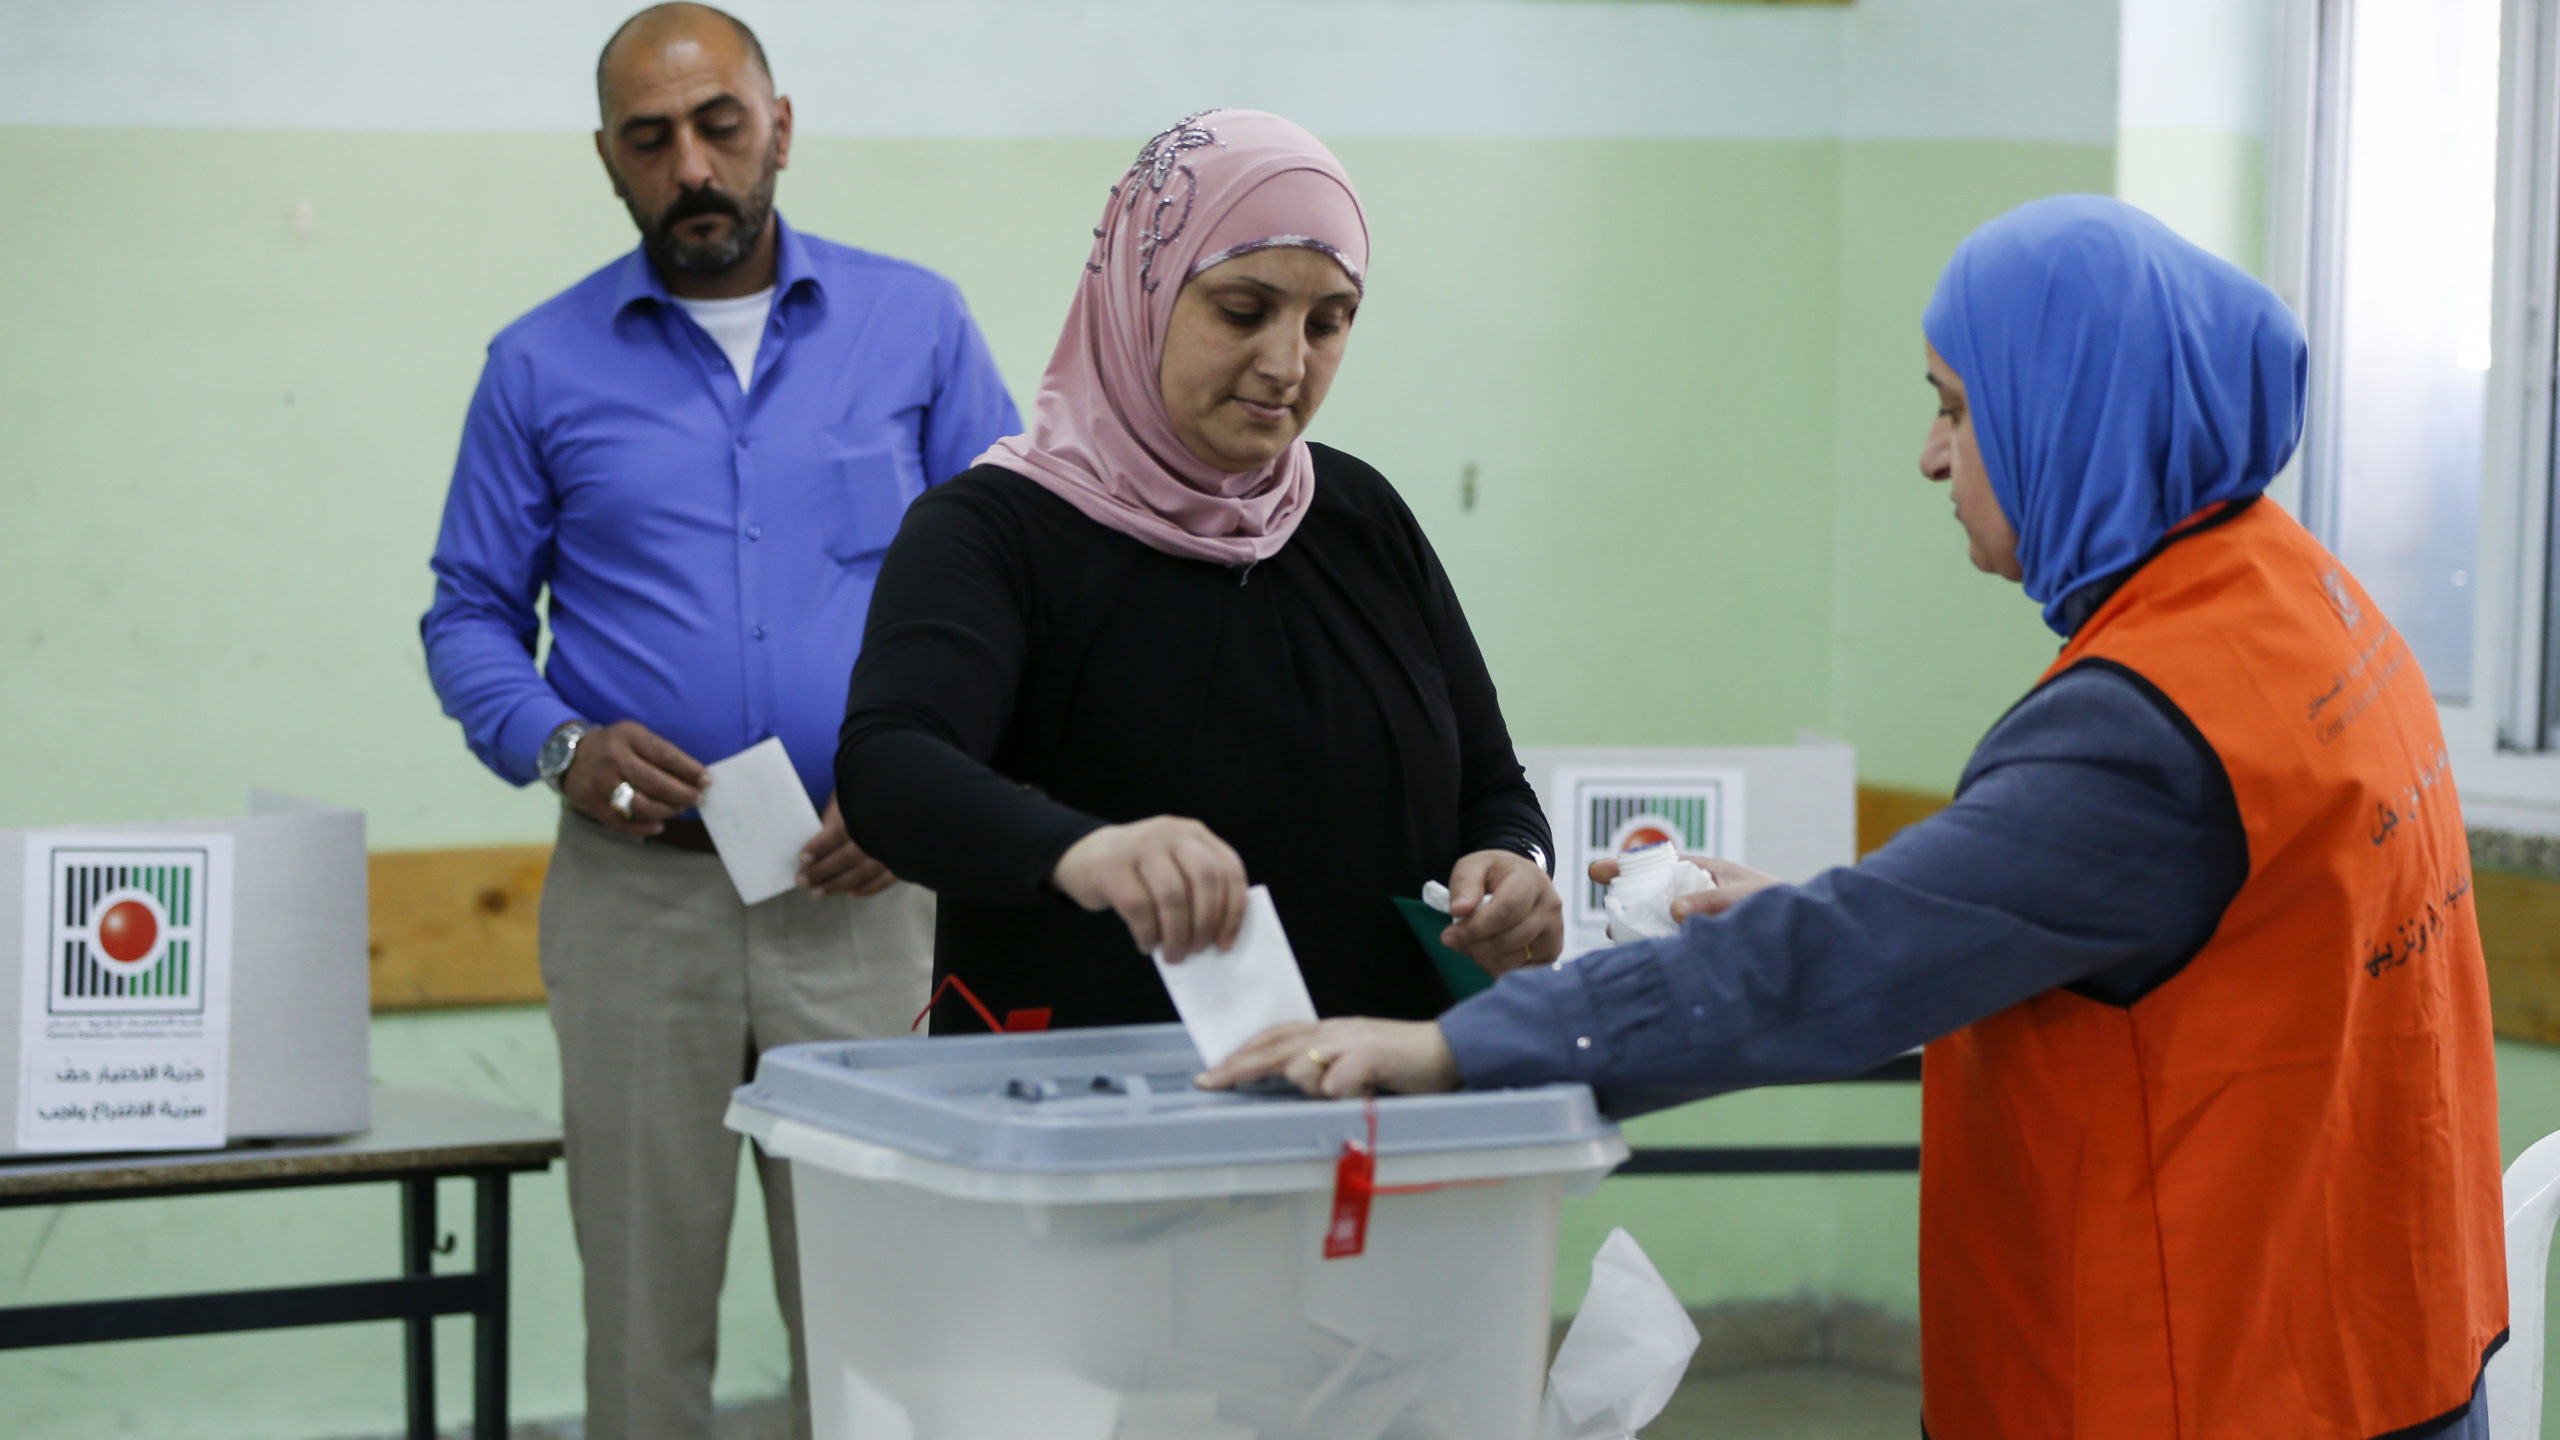 Palestinian Elections: A Battle for Democracy in the Face of Occupation